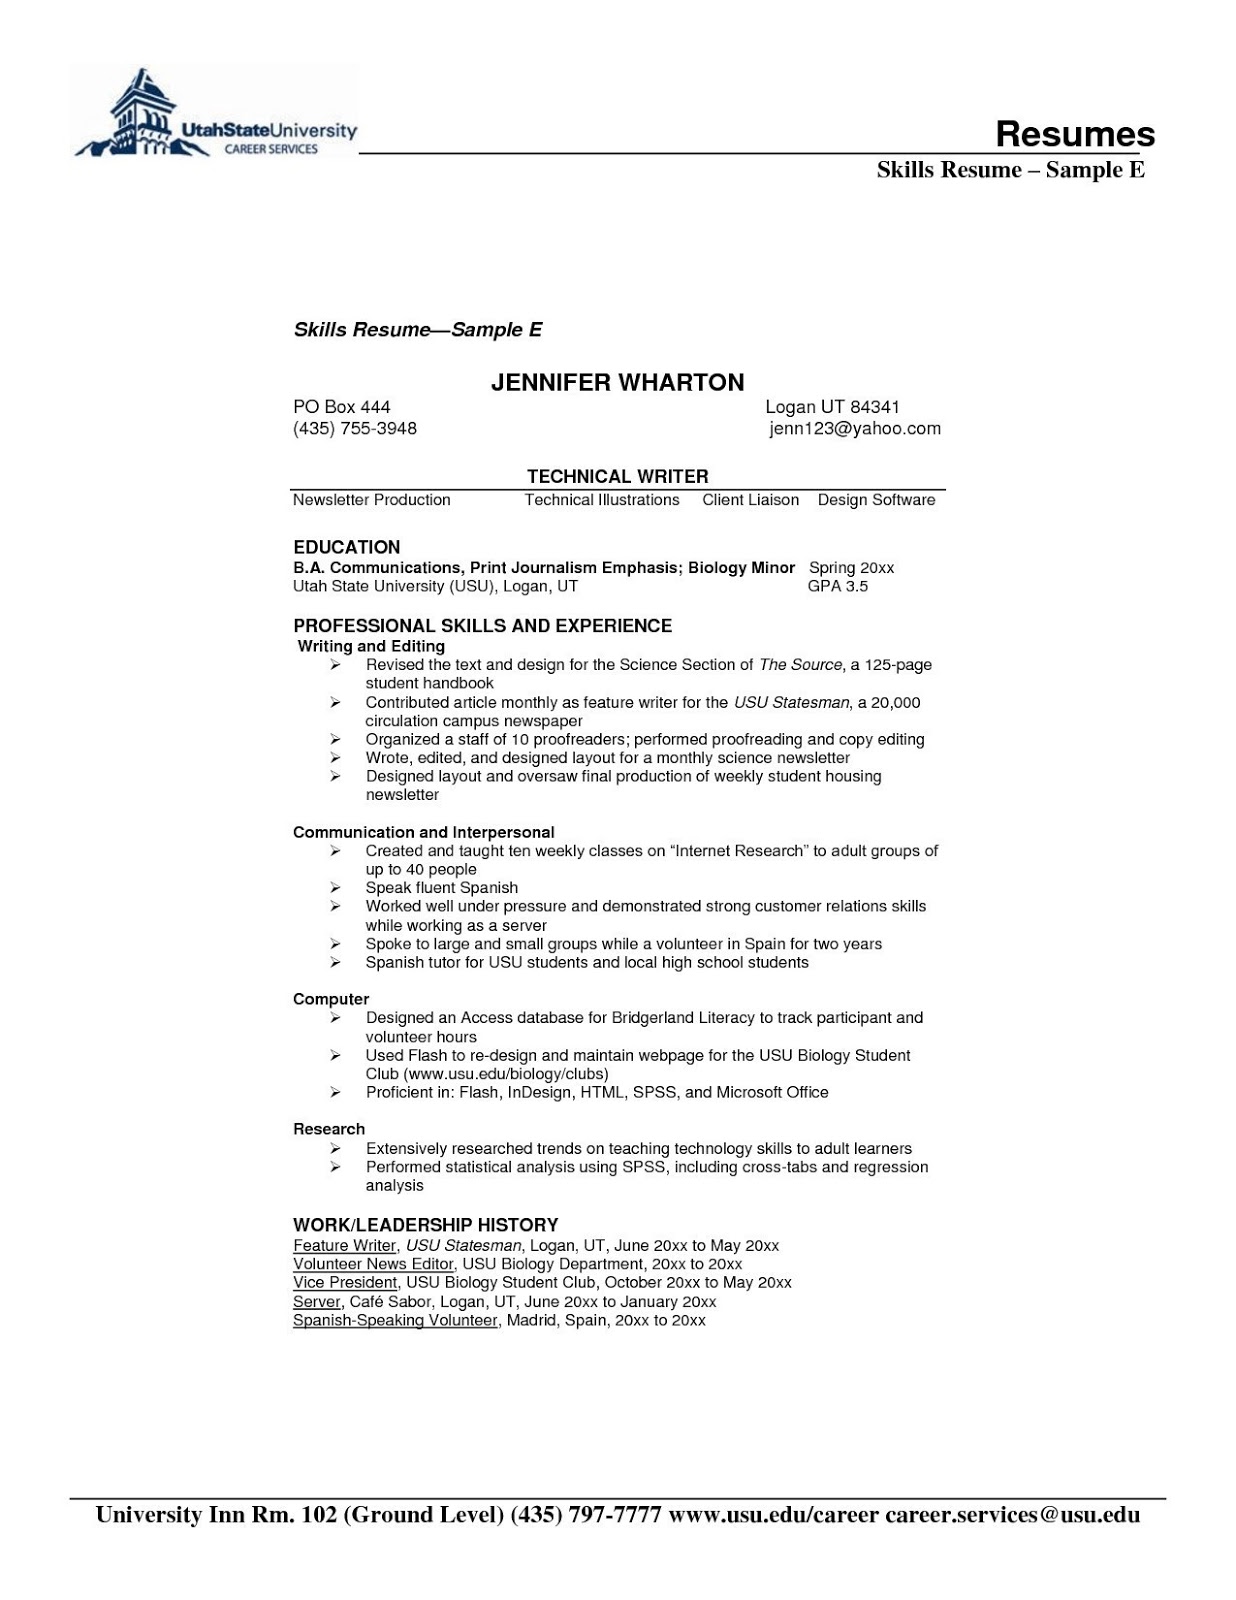 a good resume title a good resume title for customer service what is a good resume title for careerbuilder example of a good resume title a good title for a resume what would be a good resume title good resume title examples good resume title for warehouse worker good resume title for freshers good resume title for administrative assistant good resume title for monster good resume title for receptionist good resume